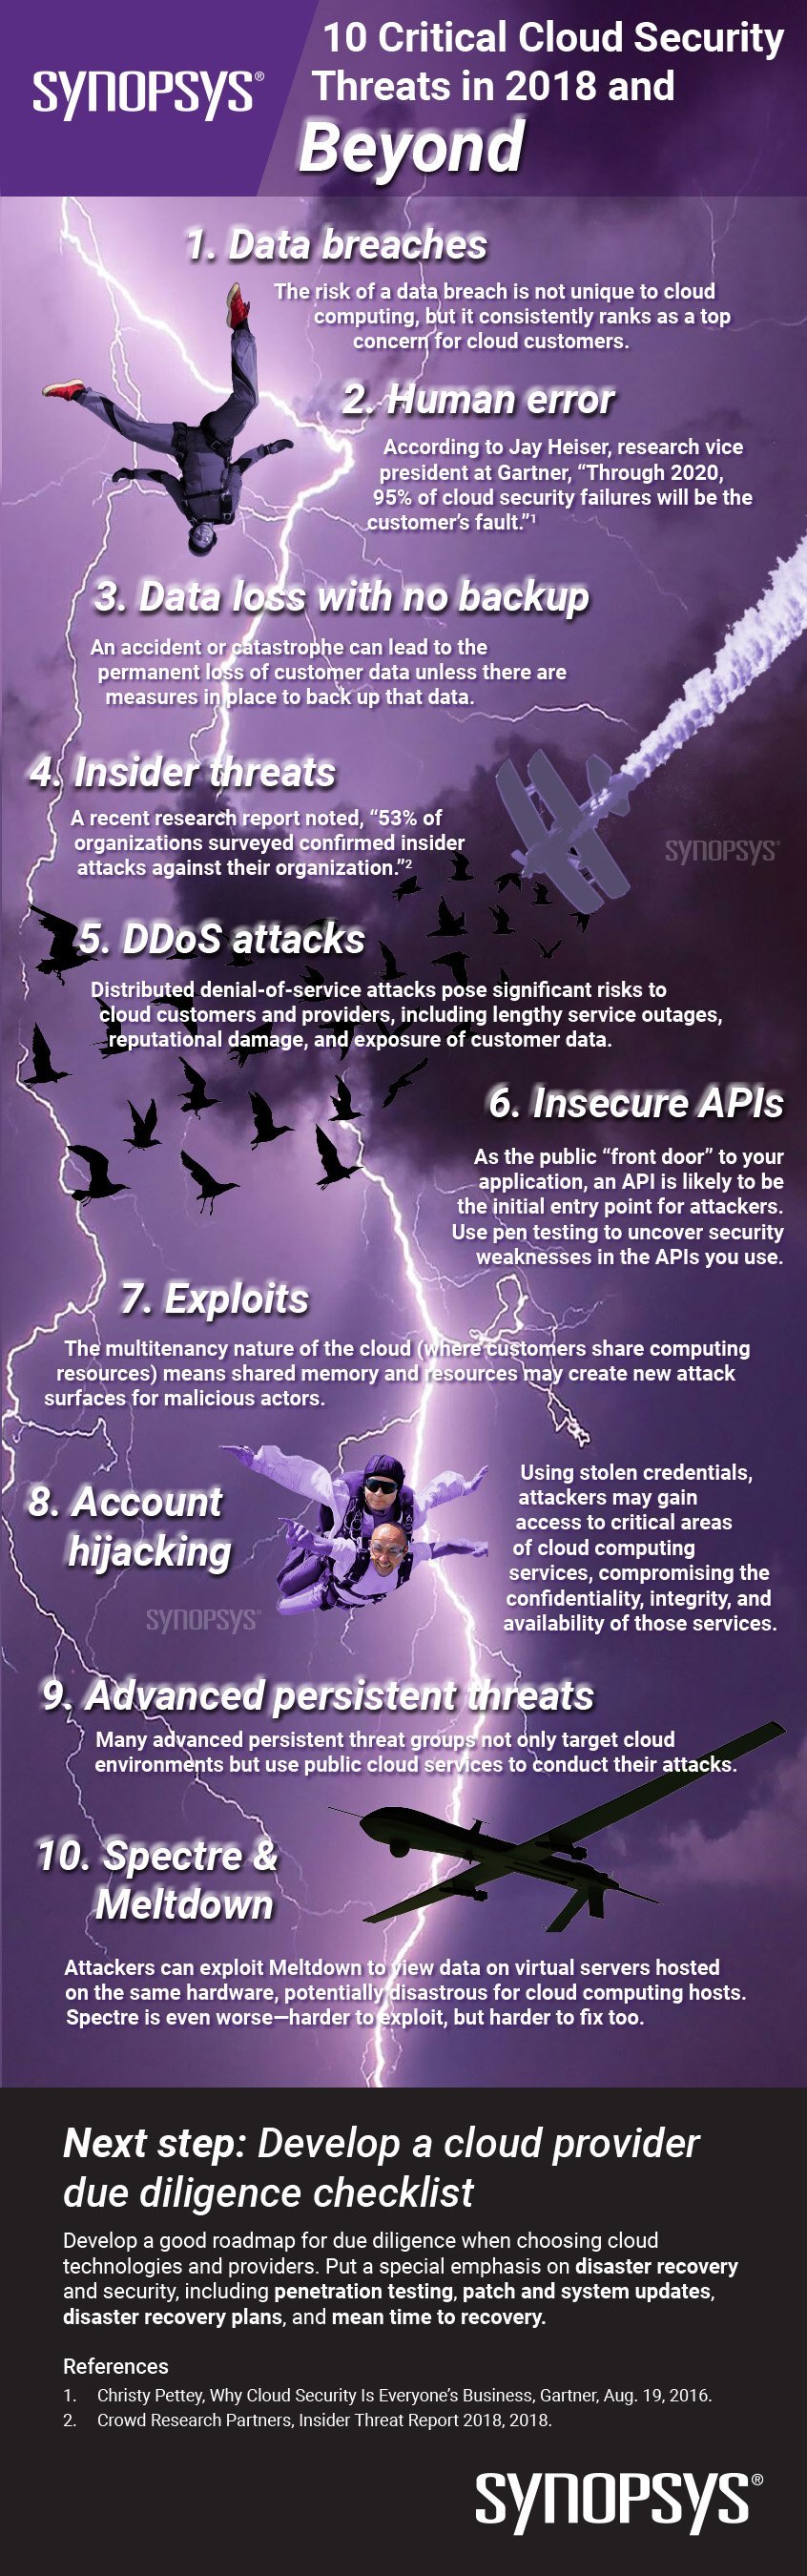 Study the Infograph below from Synopsis titled 10 Critical Cloud Security Threats for 2018 and Beyond.